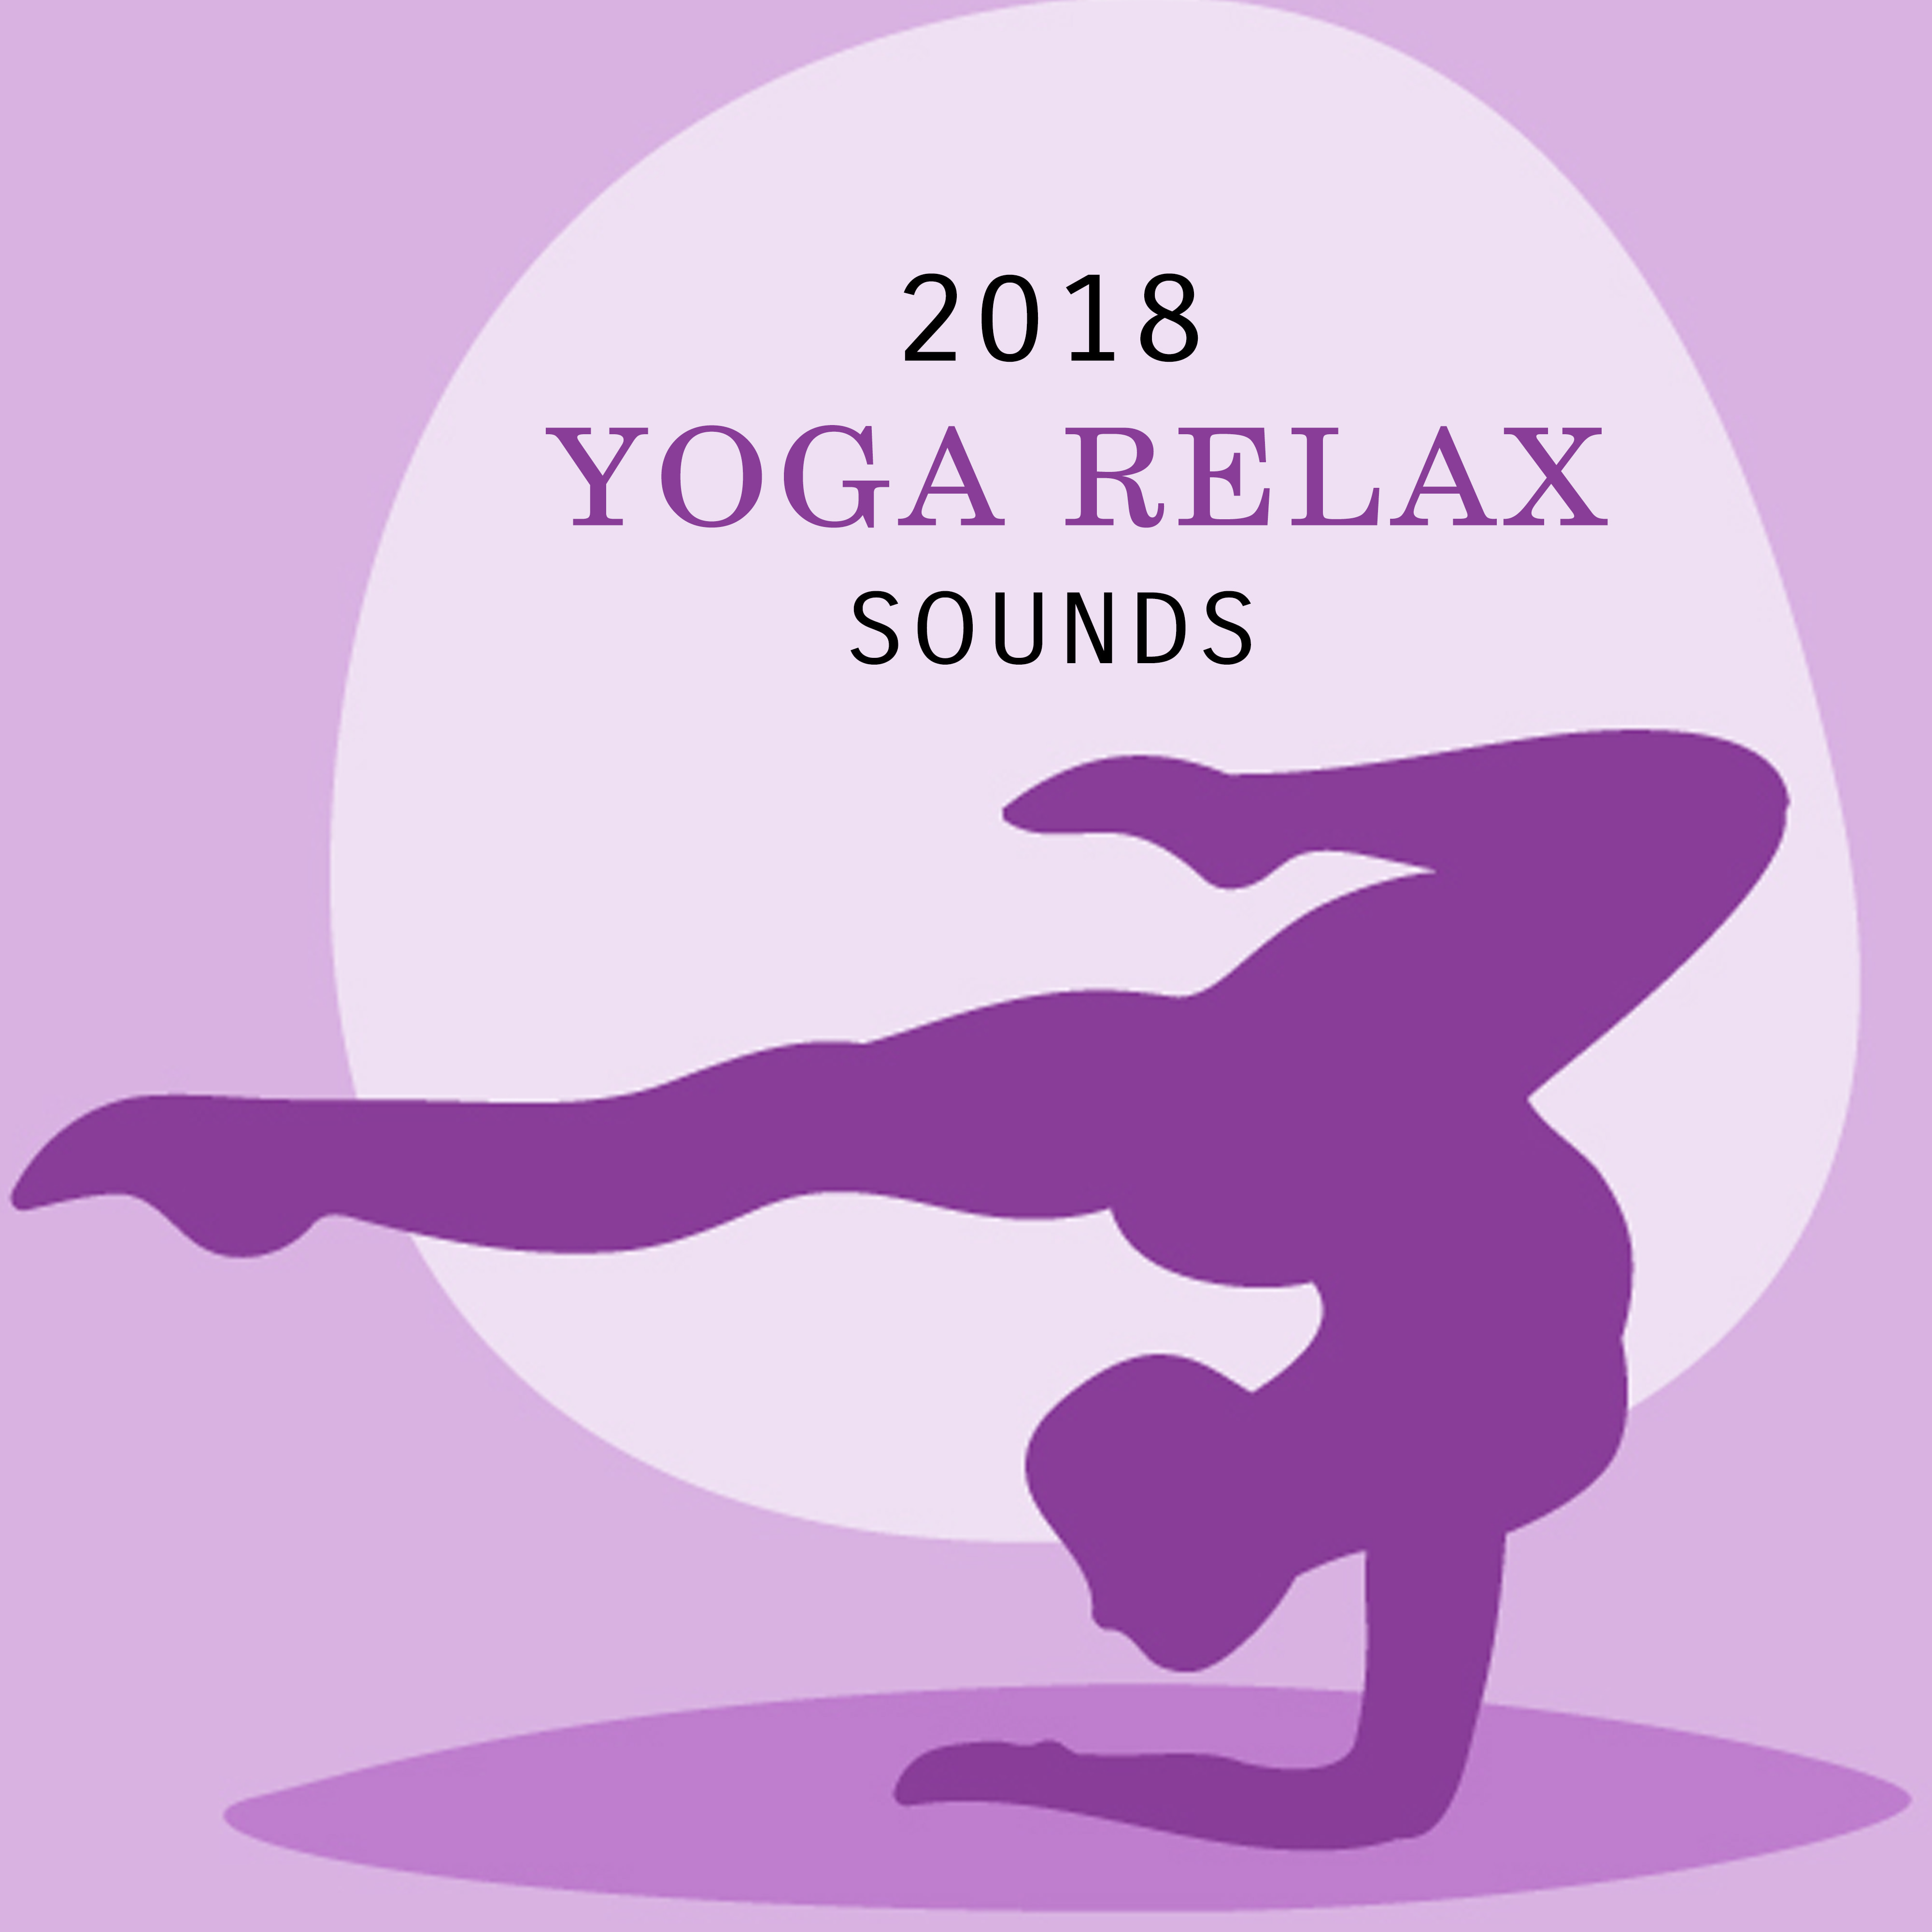 2018 Yoga Relax Sounds